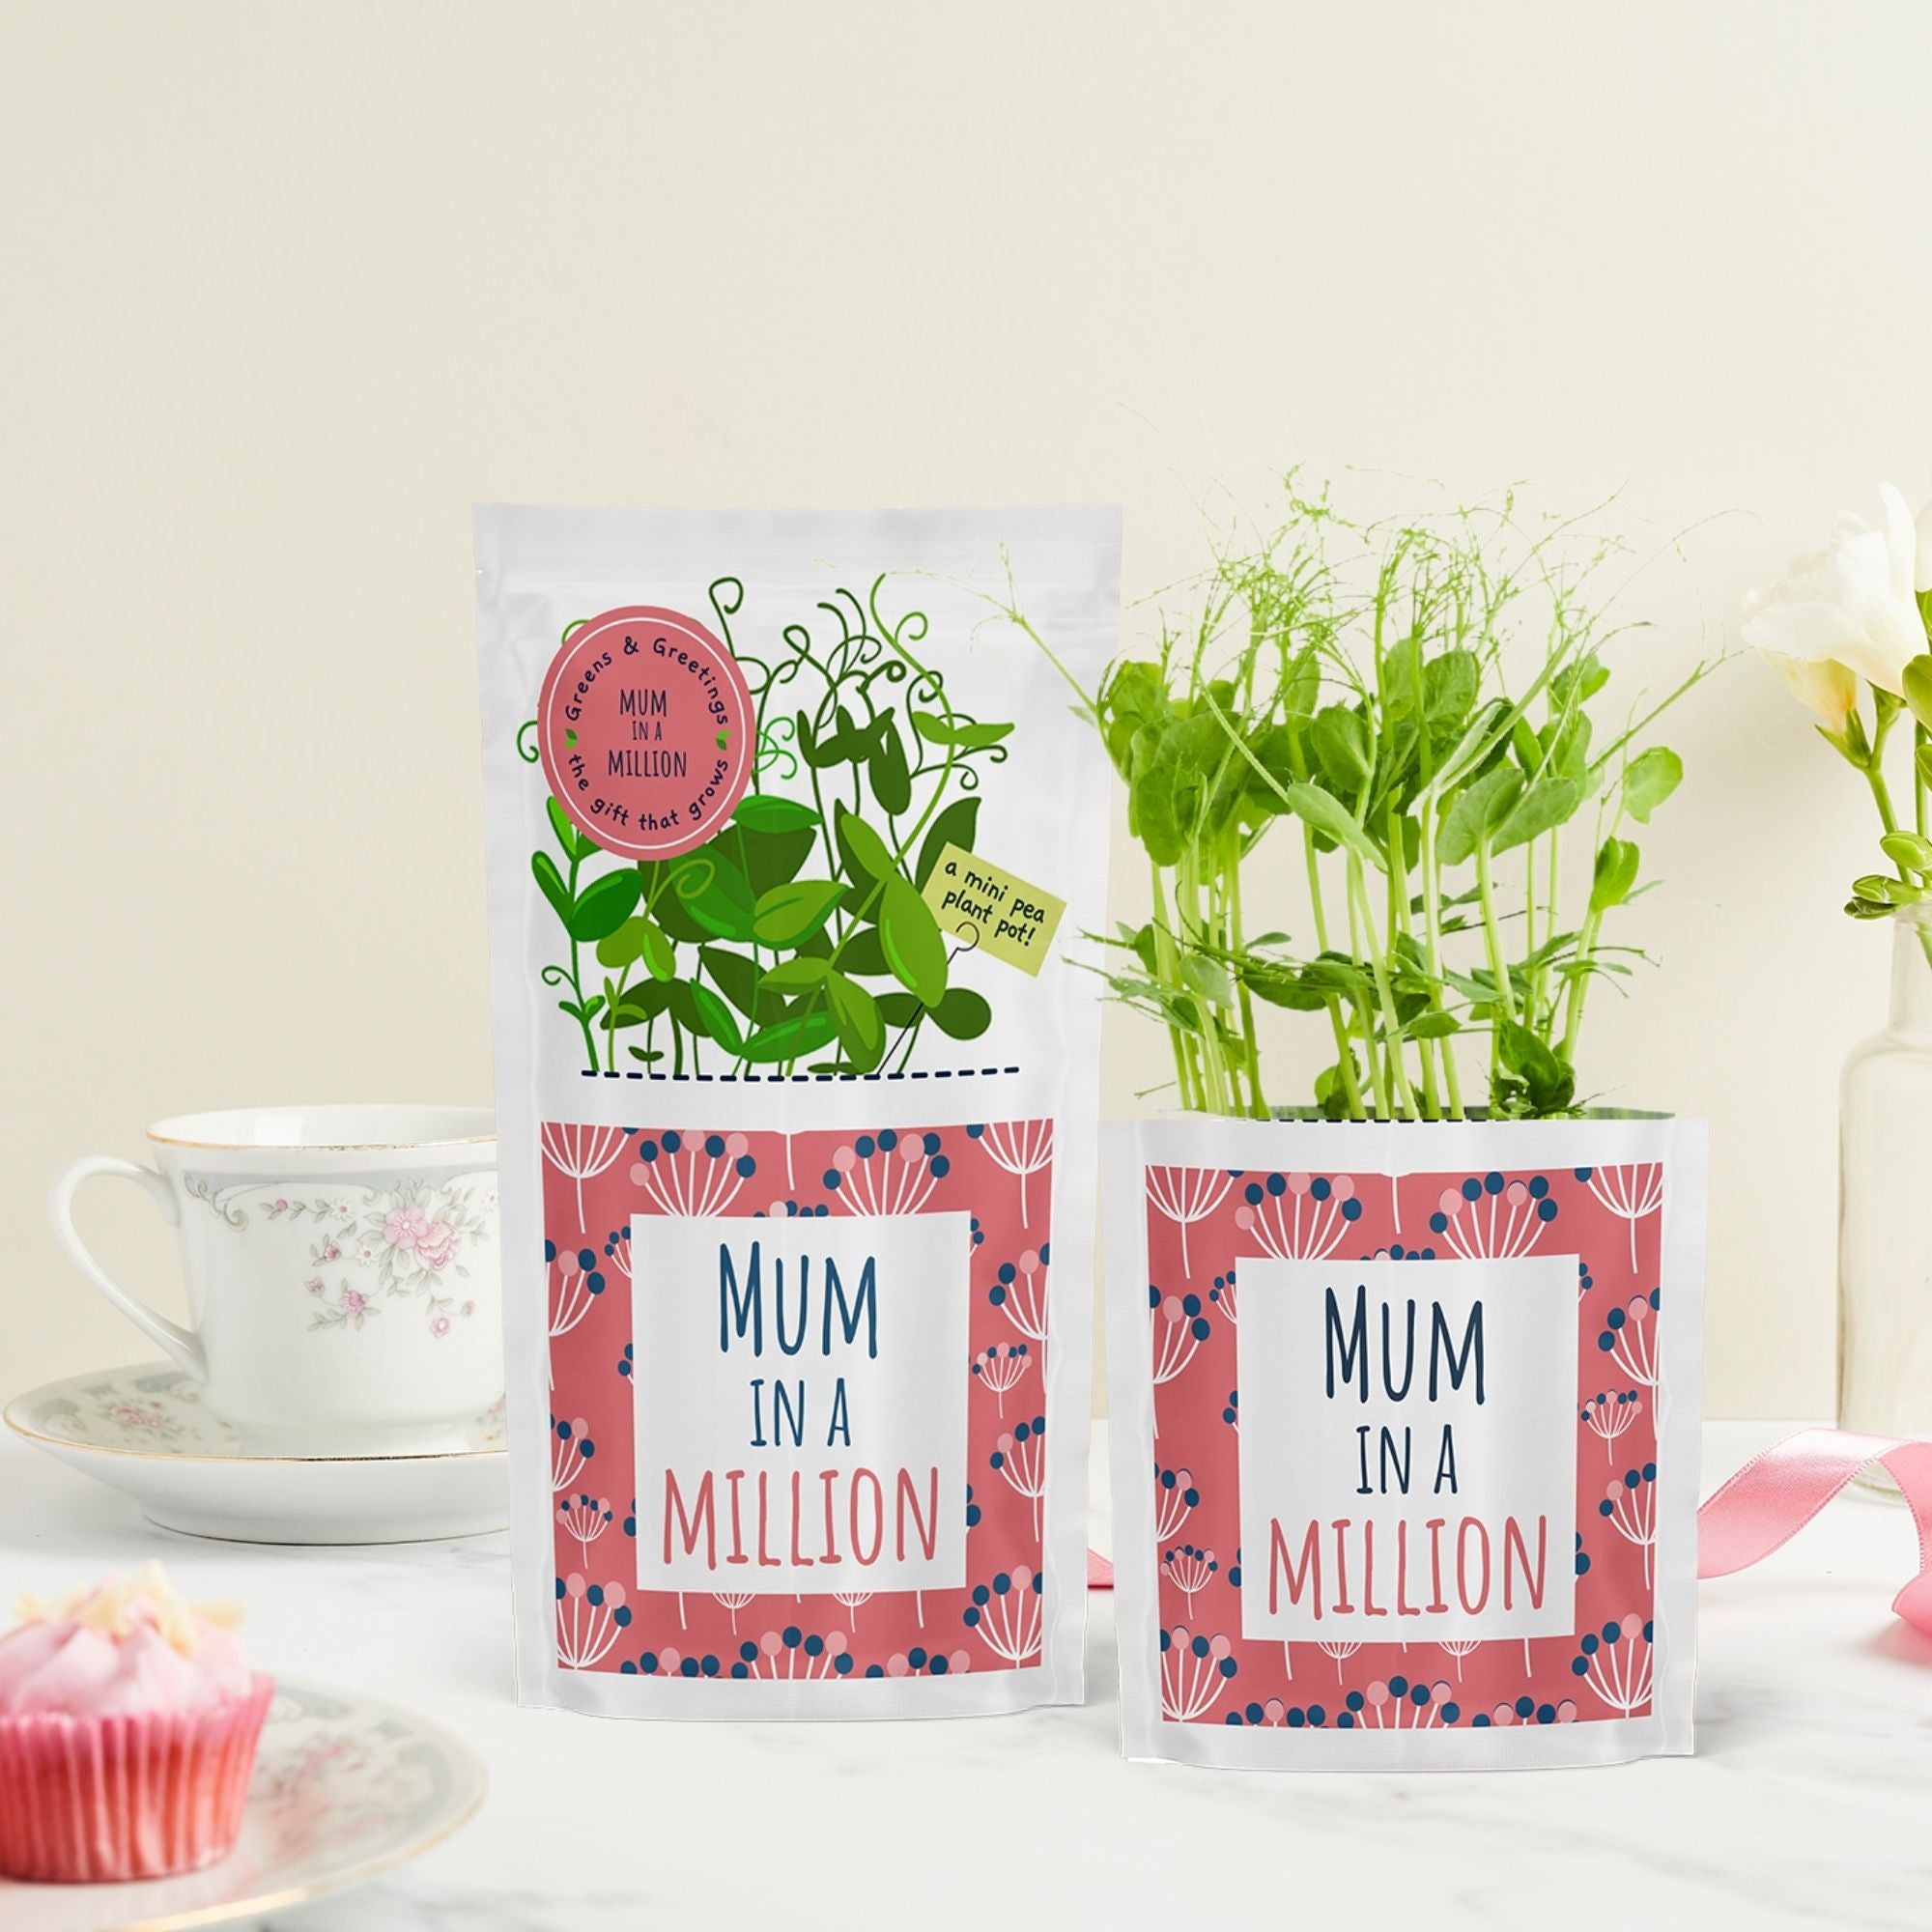 mum in a million greens and greetings shroot pea shoots and pouch.jpg